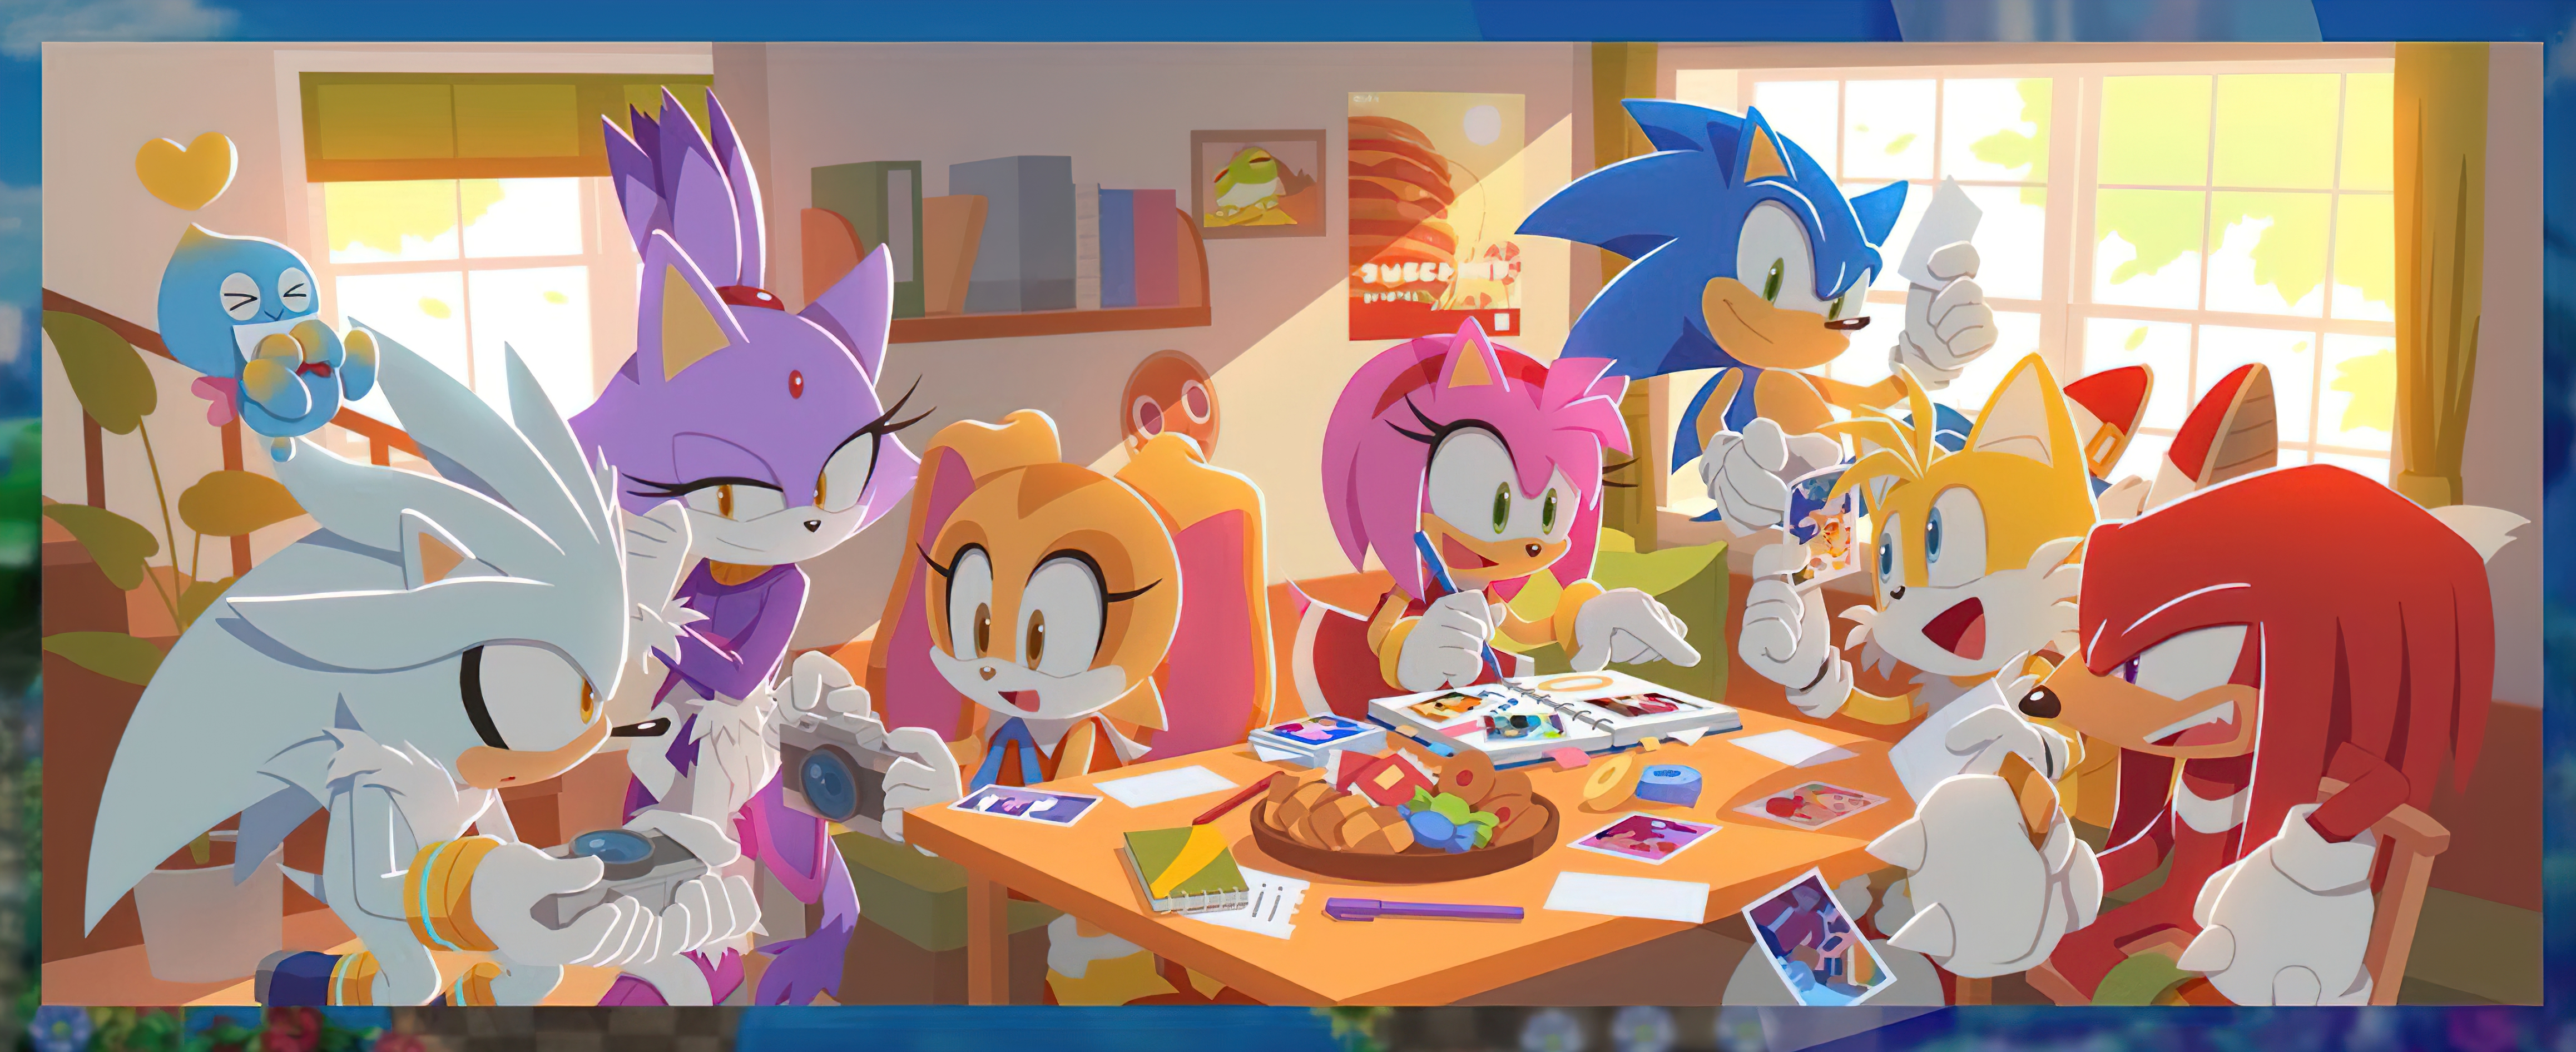 Sonic Sonic The Hedgehog Blaze The Cat Sonic Silver Tails Character Knuckles Cream Cream The Rabbit  4632x1892